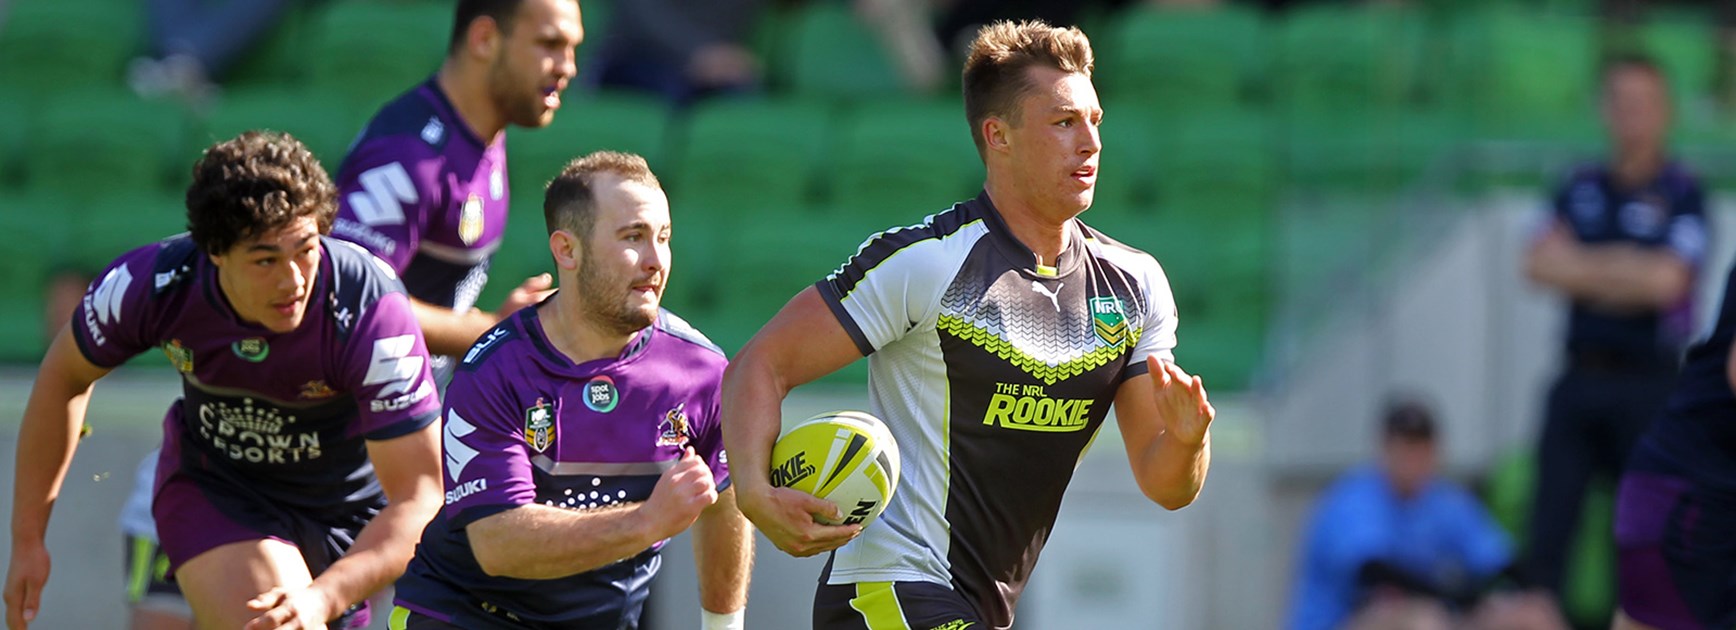 The NRL Rookies in action against Melbourne Storm's Holden Cup team.